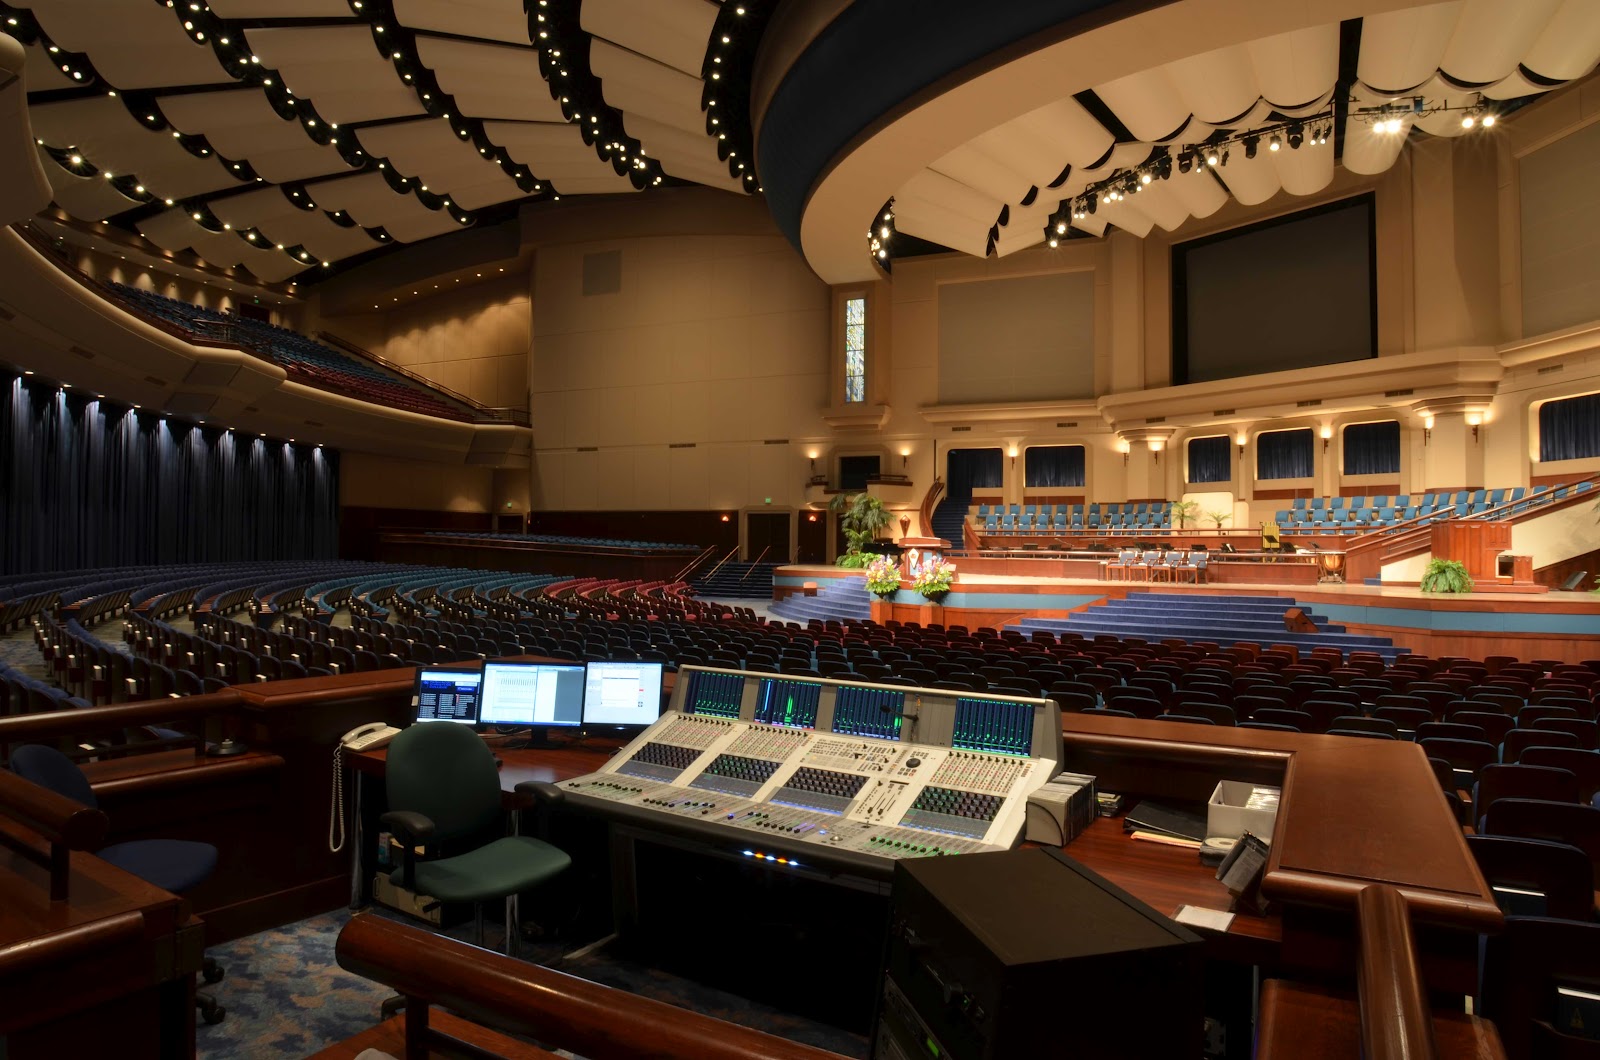 Crowne Centre Auditorium At Pensacola Christian College Upgrades With HARMAN's Studer Consoles and BSS Audio Processors 